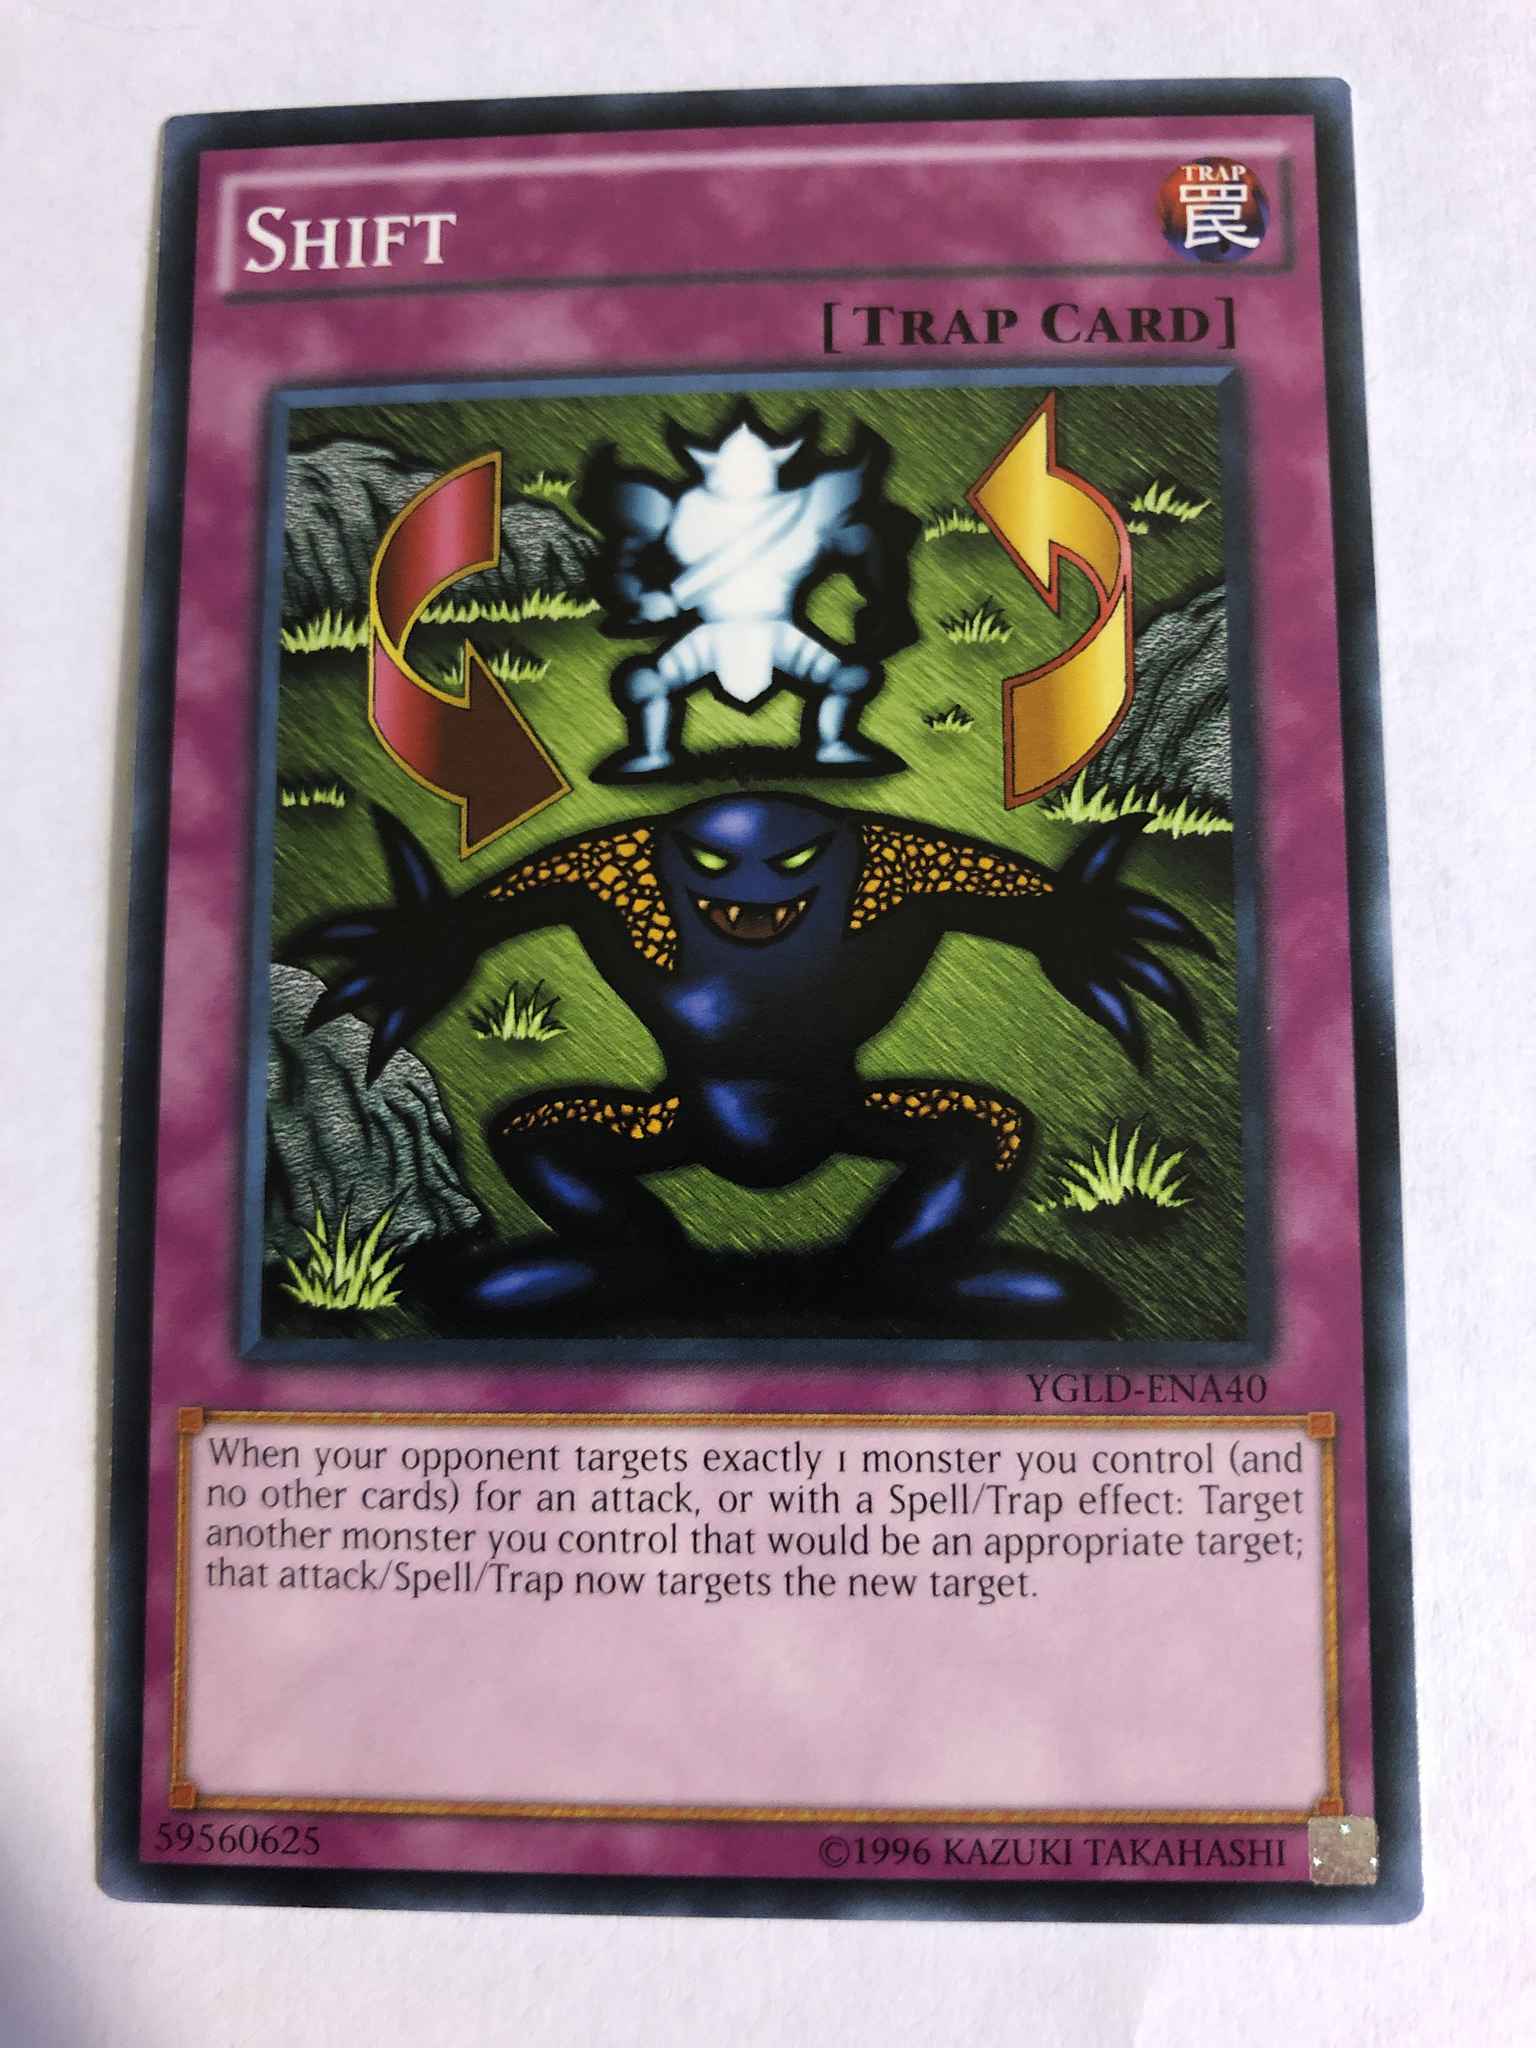 Yugioh Trap Card Shift YGLD-ENA40 Unlimited Common 